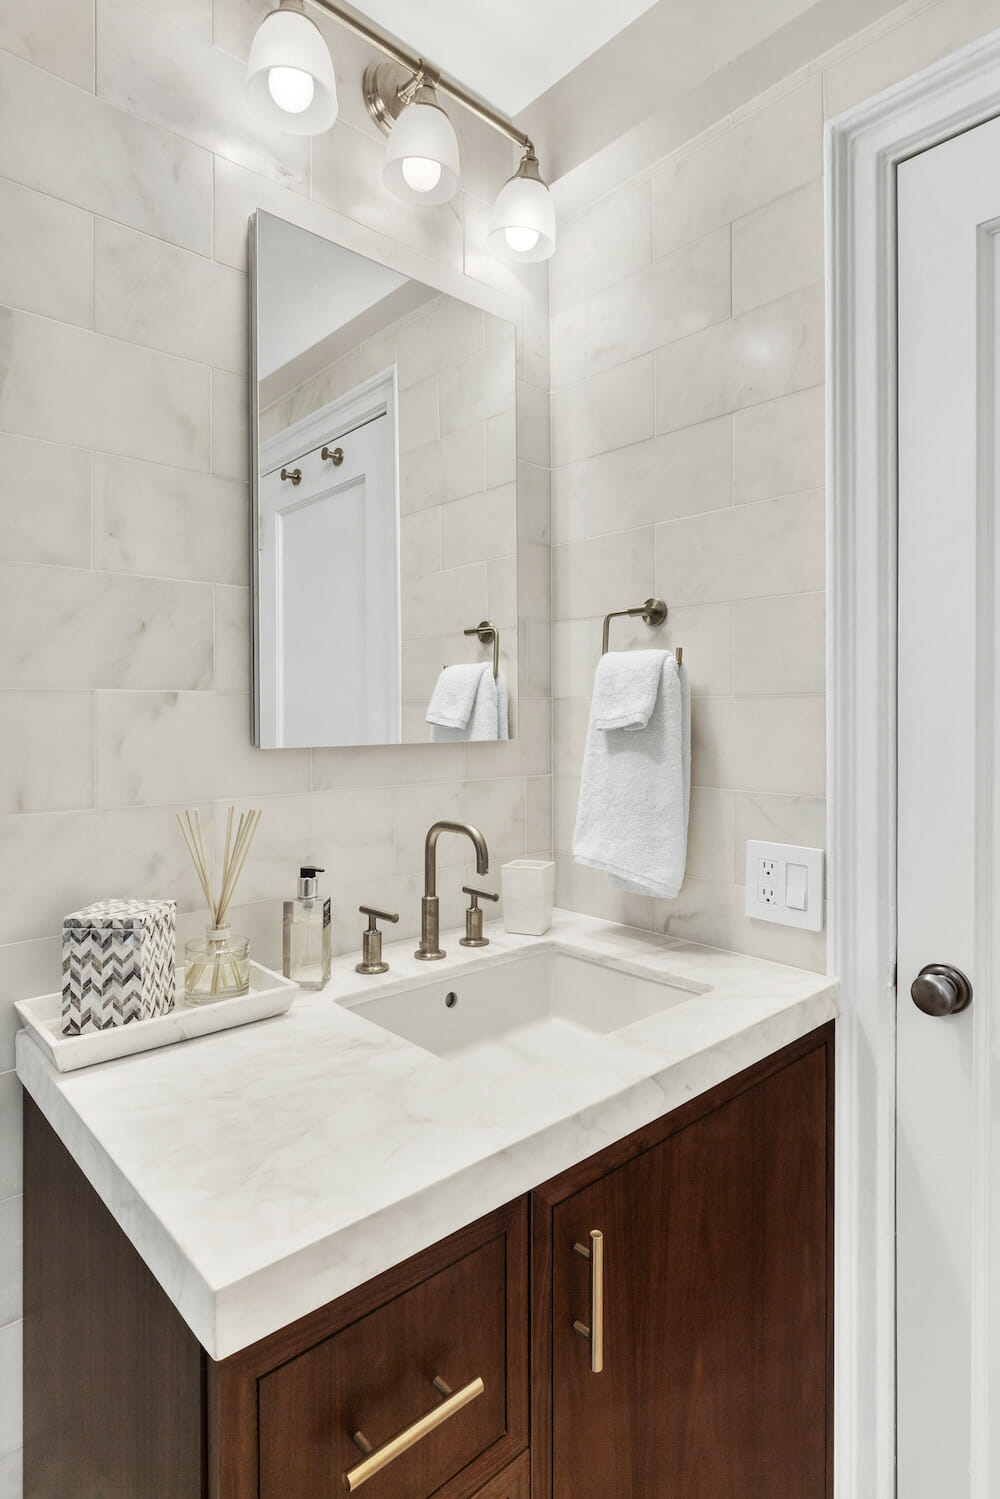 white marble tiles on bathroom wall and white marble countertop with undermount sink and brass faucet and wall mounted lights above medicine cabinet with mirror after renovation